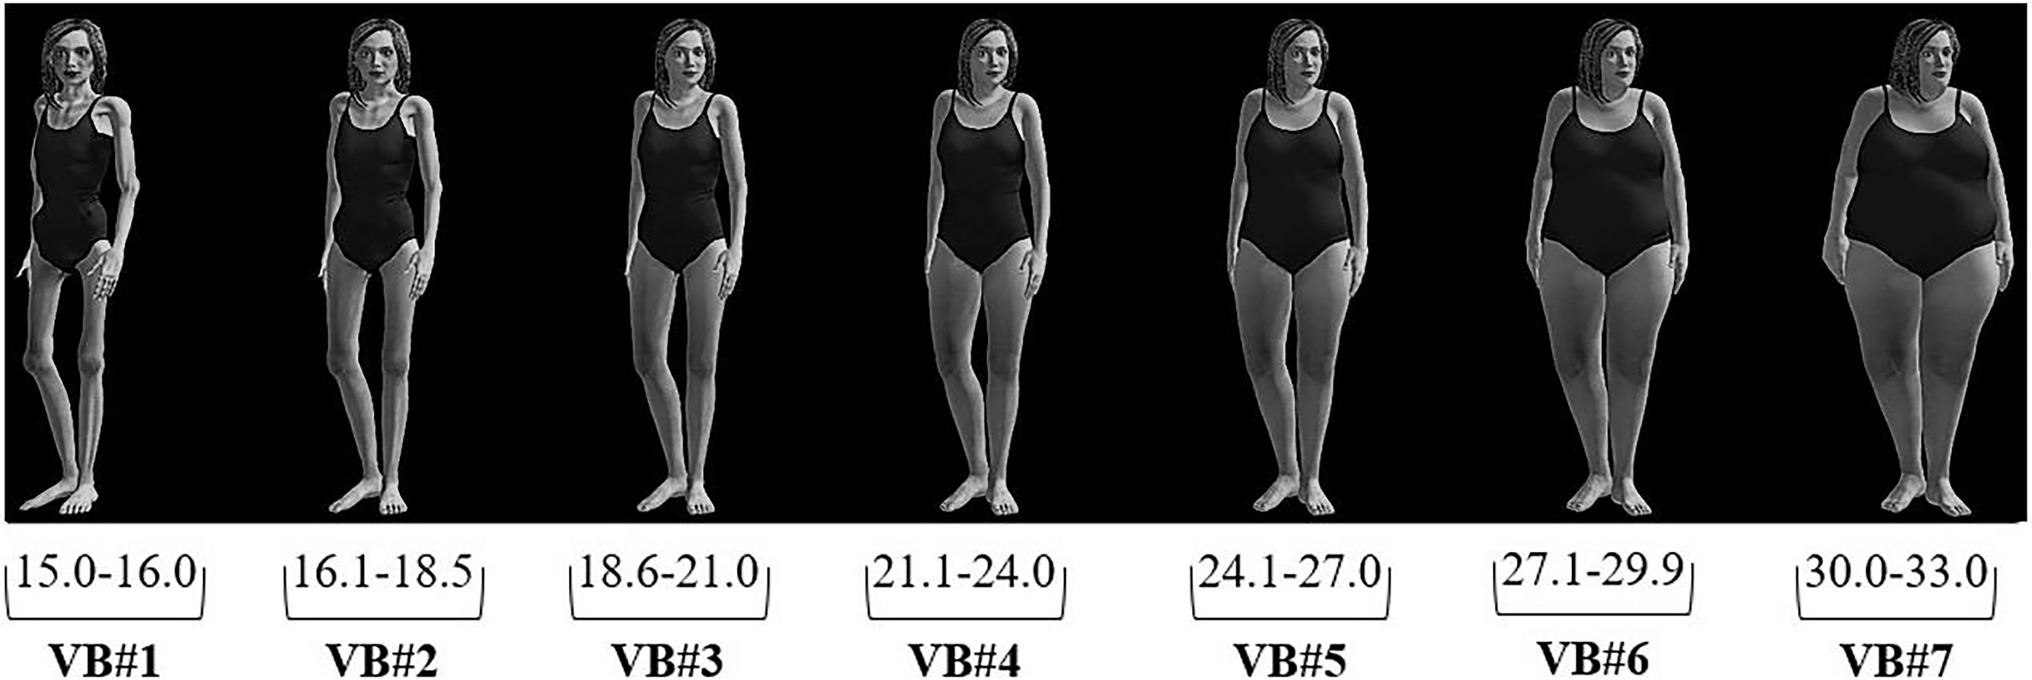 Frontiers  The Relationship Between Women's Negative Body Image and  Disordered Eating Behaviors During the COVID-19 Pandemic: A Cross-Sectional  Study